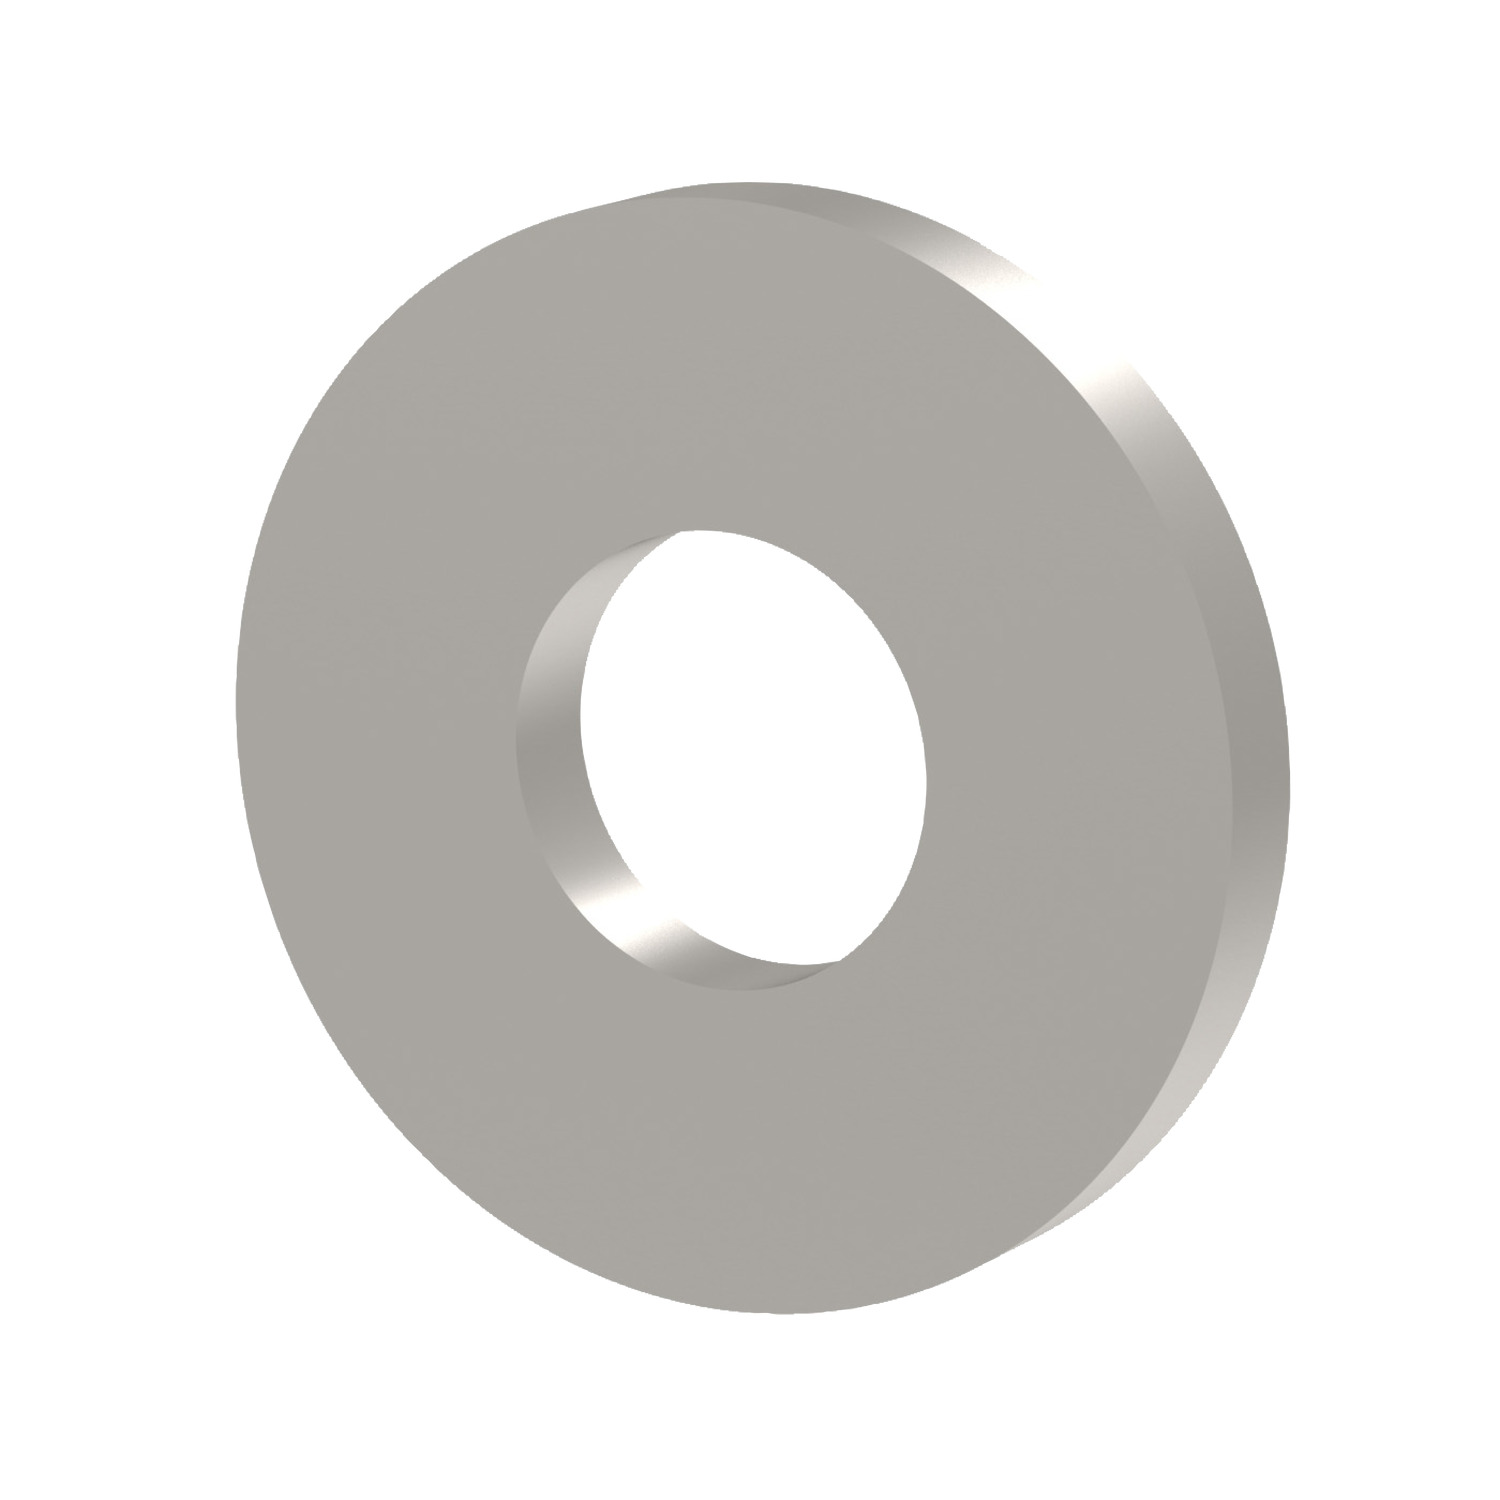 P0330.020-A2 Form A Flat Washer  DIN 125A M2 A2 s/s .